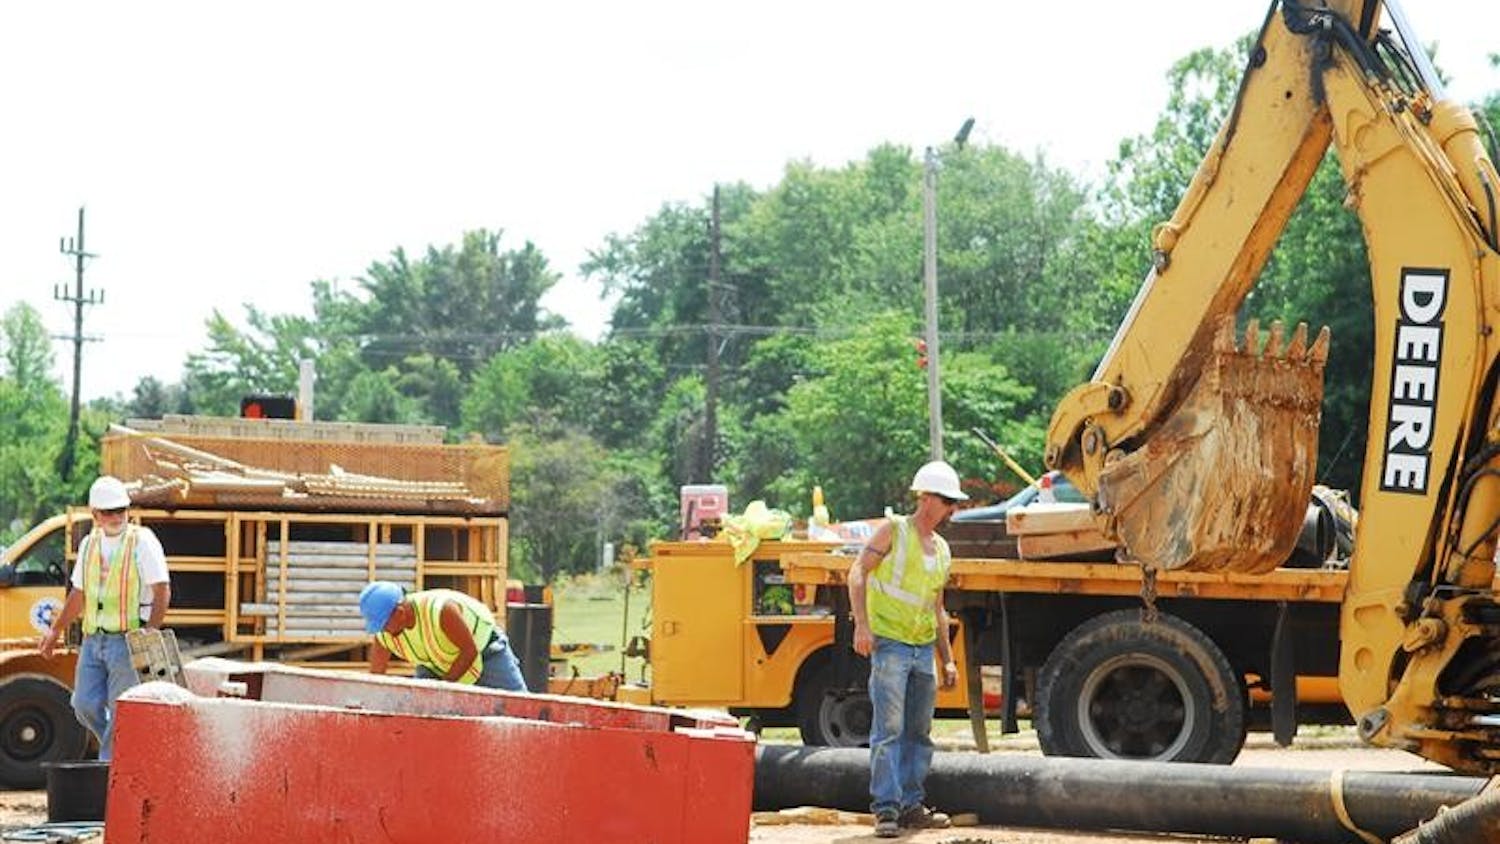 City of Bloomington utility employees work to fix the broken water main at 10th Street and the 45/46 bypass on Wednesday afternoon.